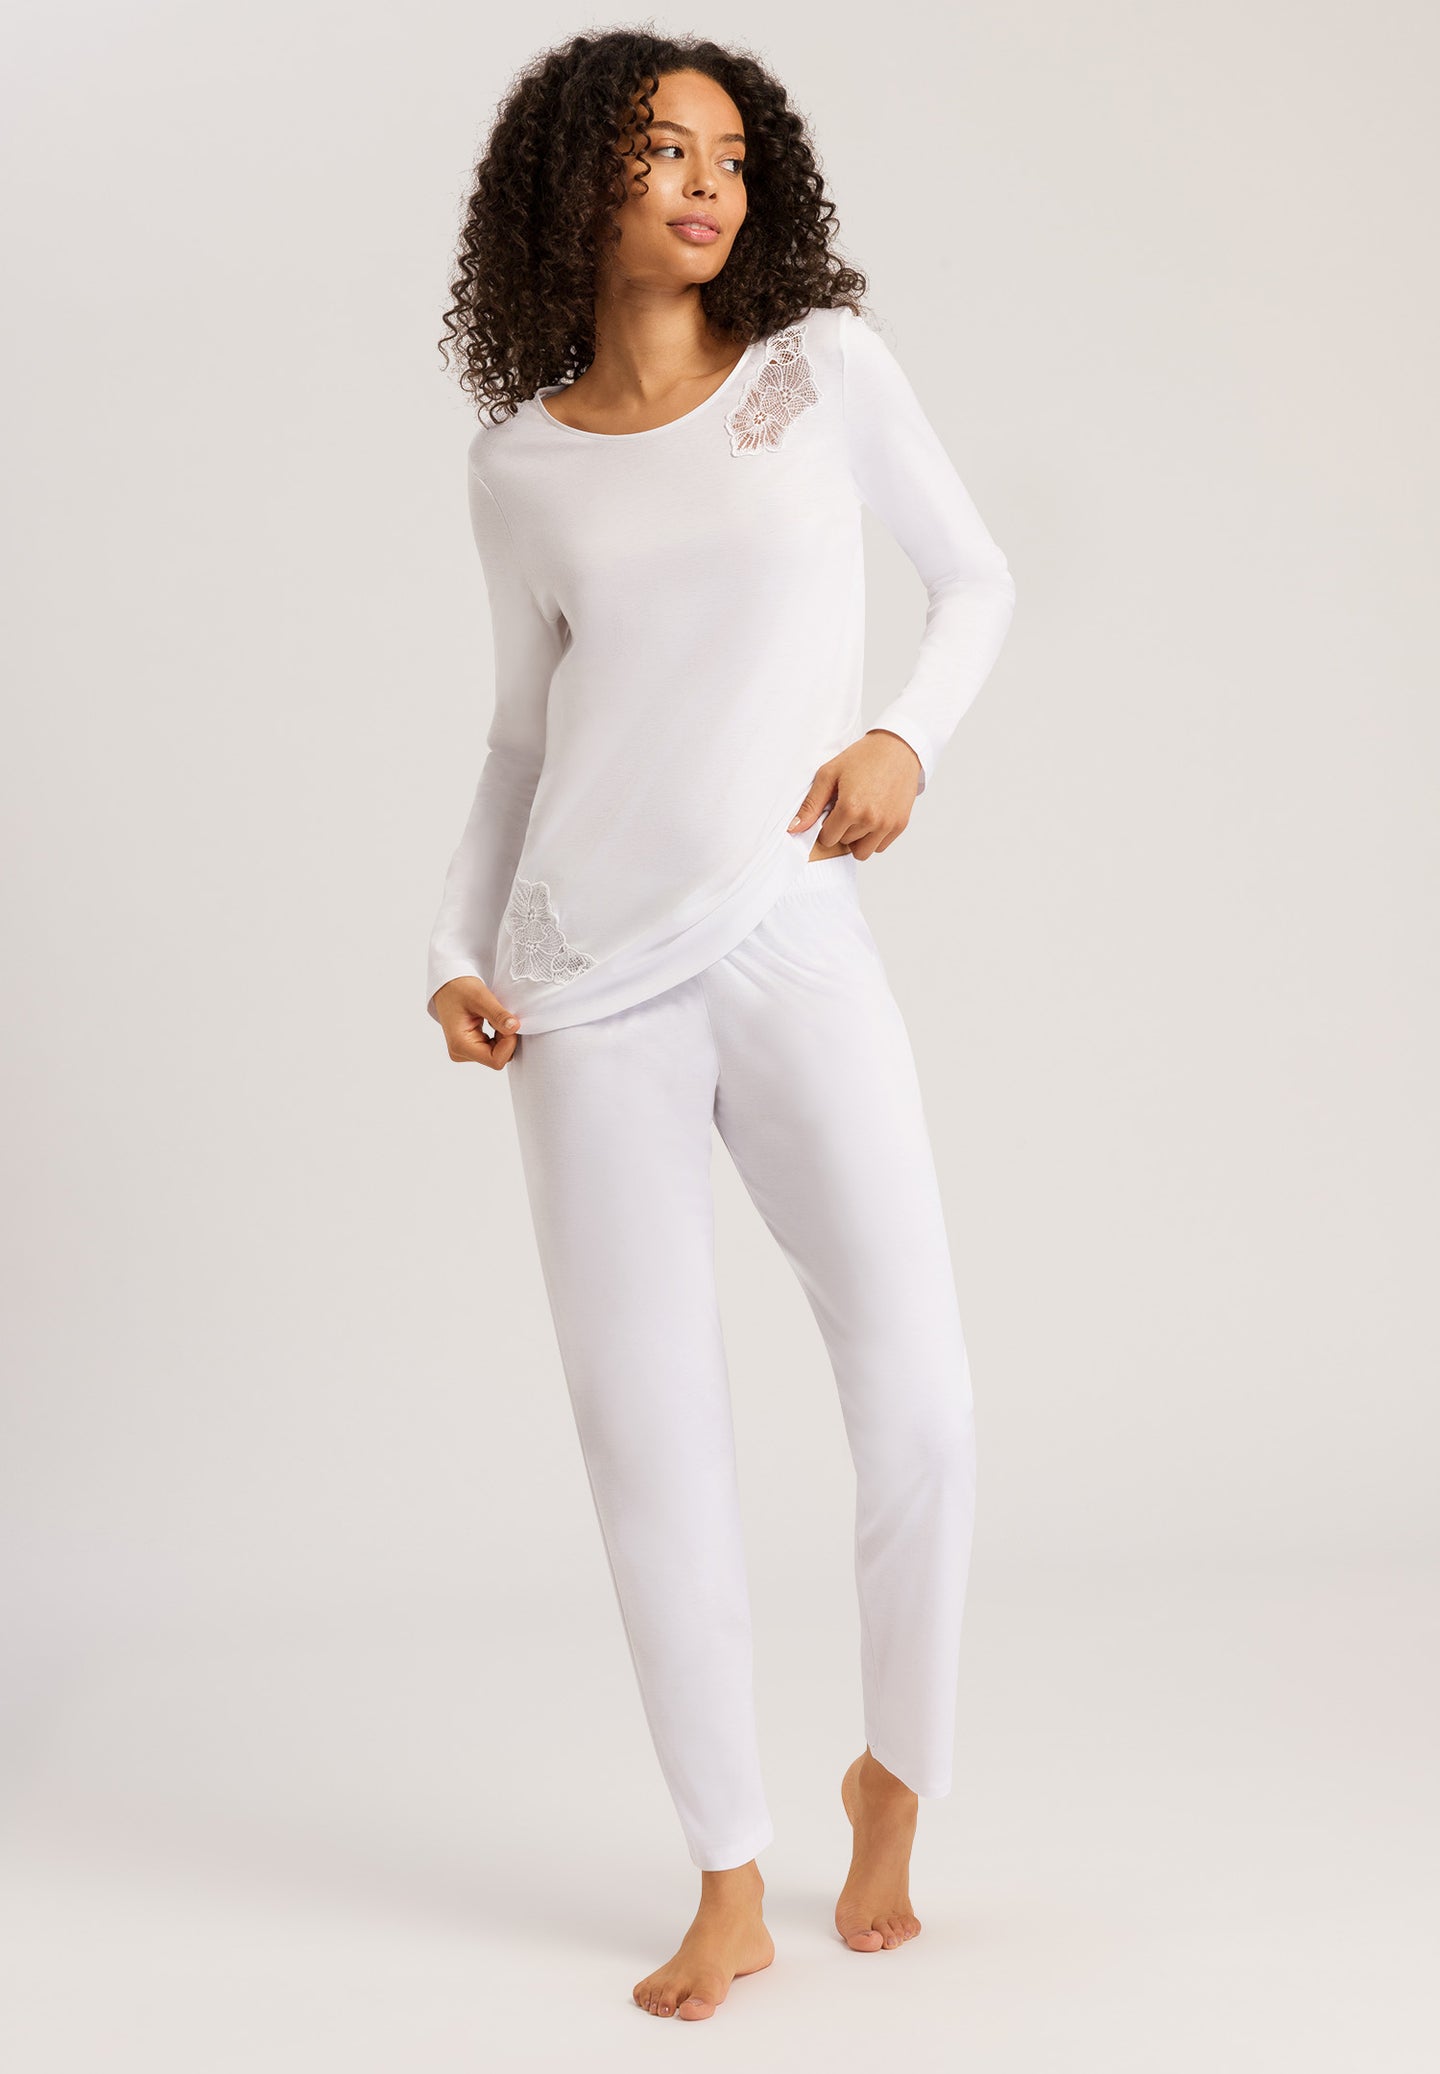 Made from 100% soft mercerised knitted cotton, Rounded neckline with an appliqué lace inset at the neck & front hem. Perfect item for lounging or sound sleep. Gentle rounded collar, long sleeves and with loose fitting trousers, elasticated at the waist.  Composition: 100% Pure Cotton 100% Polyester Lace  Made in Europe Machine washable. Pure White.